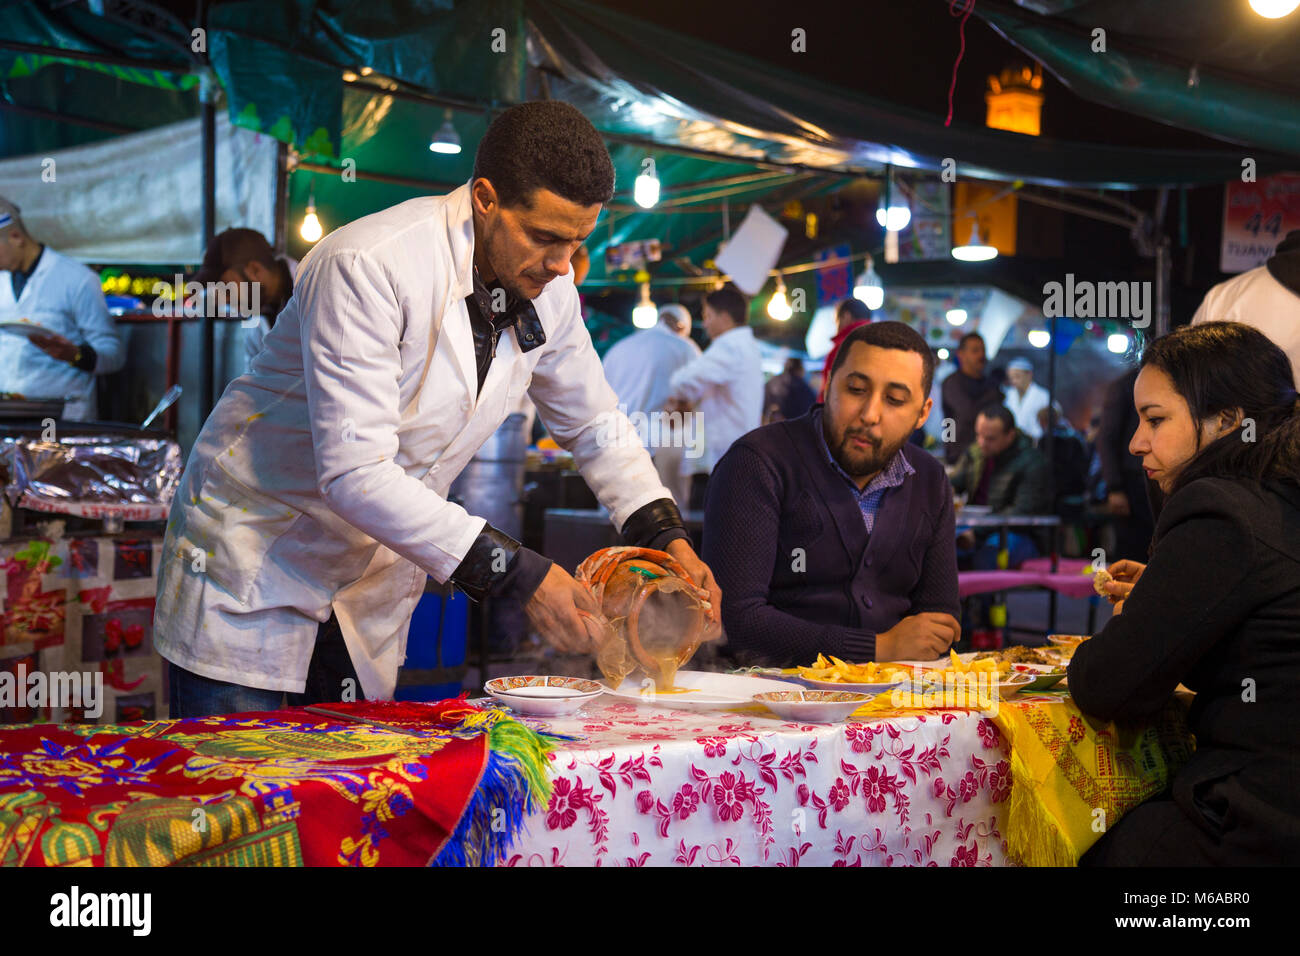 Waiter poring out a tangia from a ceramic pot onto a plate at the food market in Jemaa el-Fnaa, Marrakech, Morocco Stock Photo